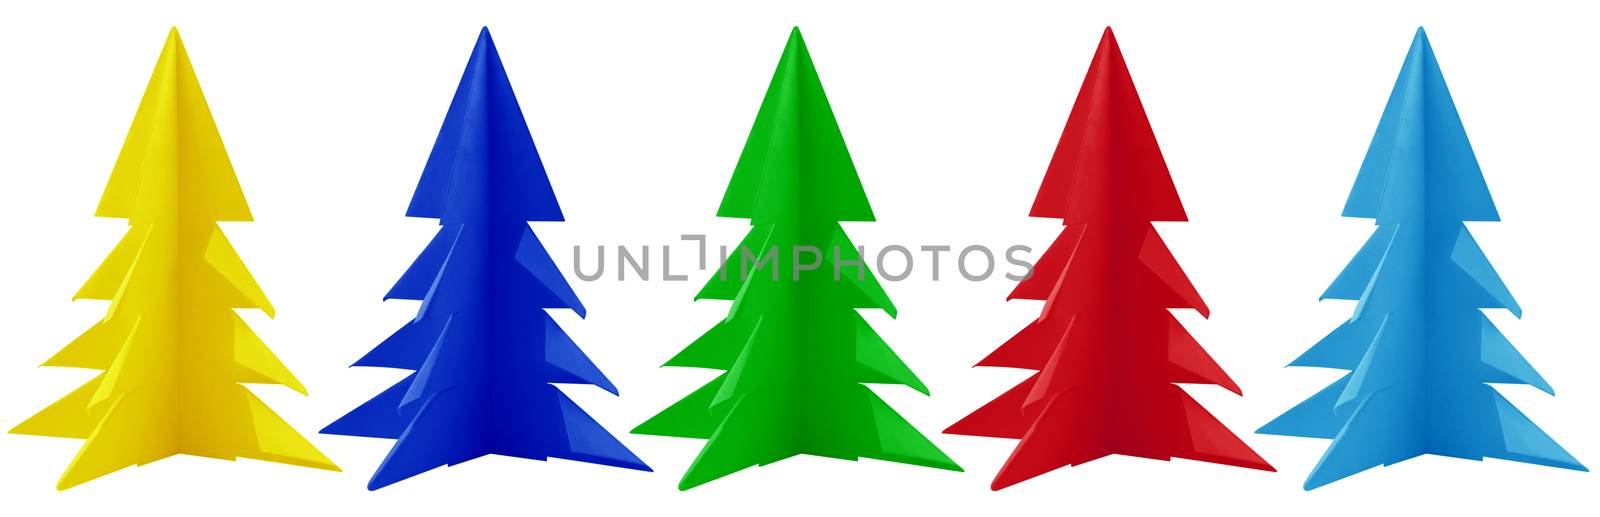 Christmas tree made of paper - colorful by Venakr